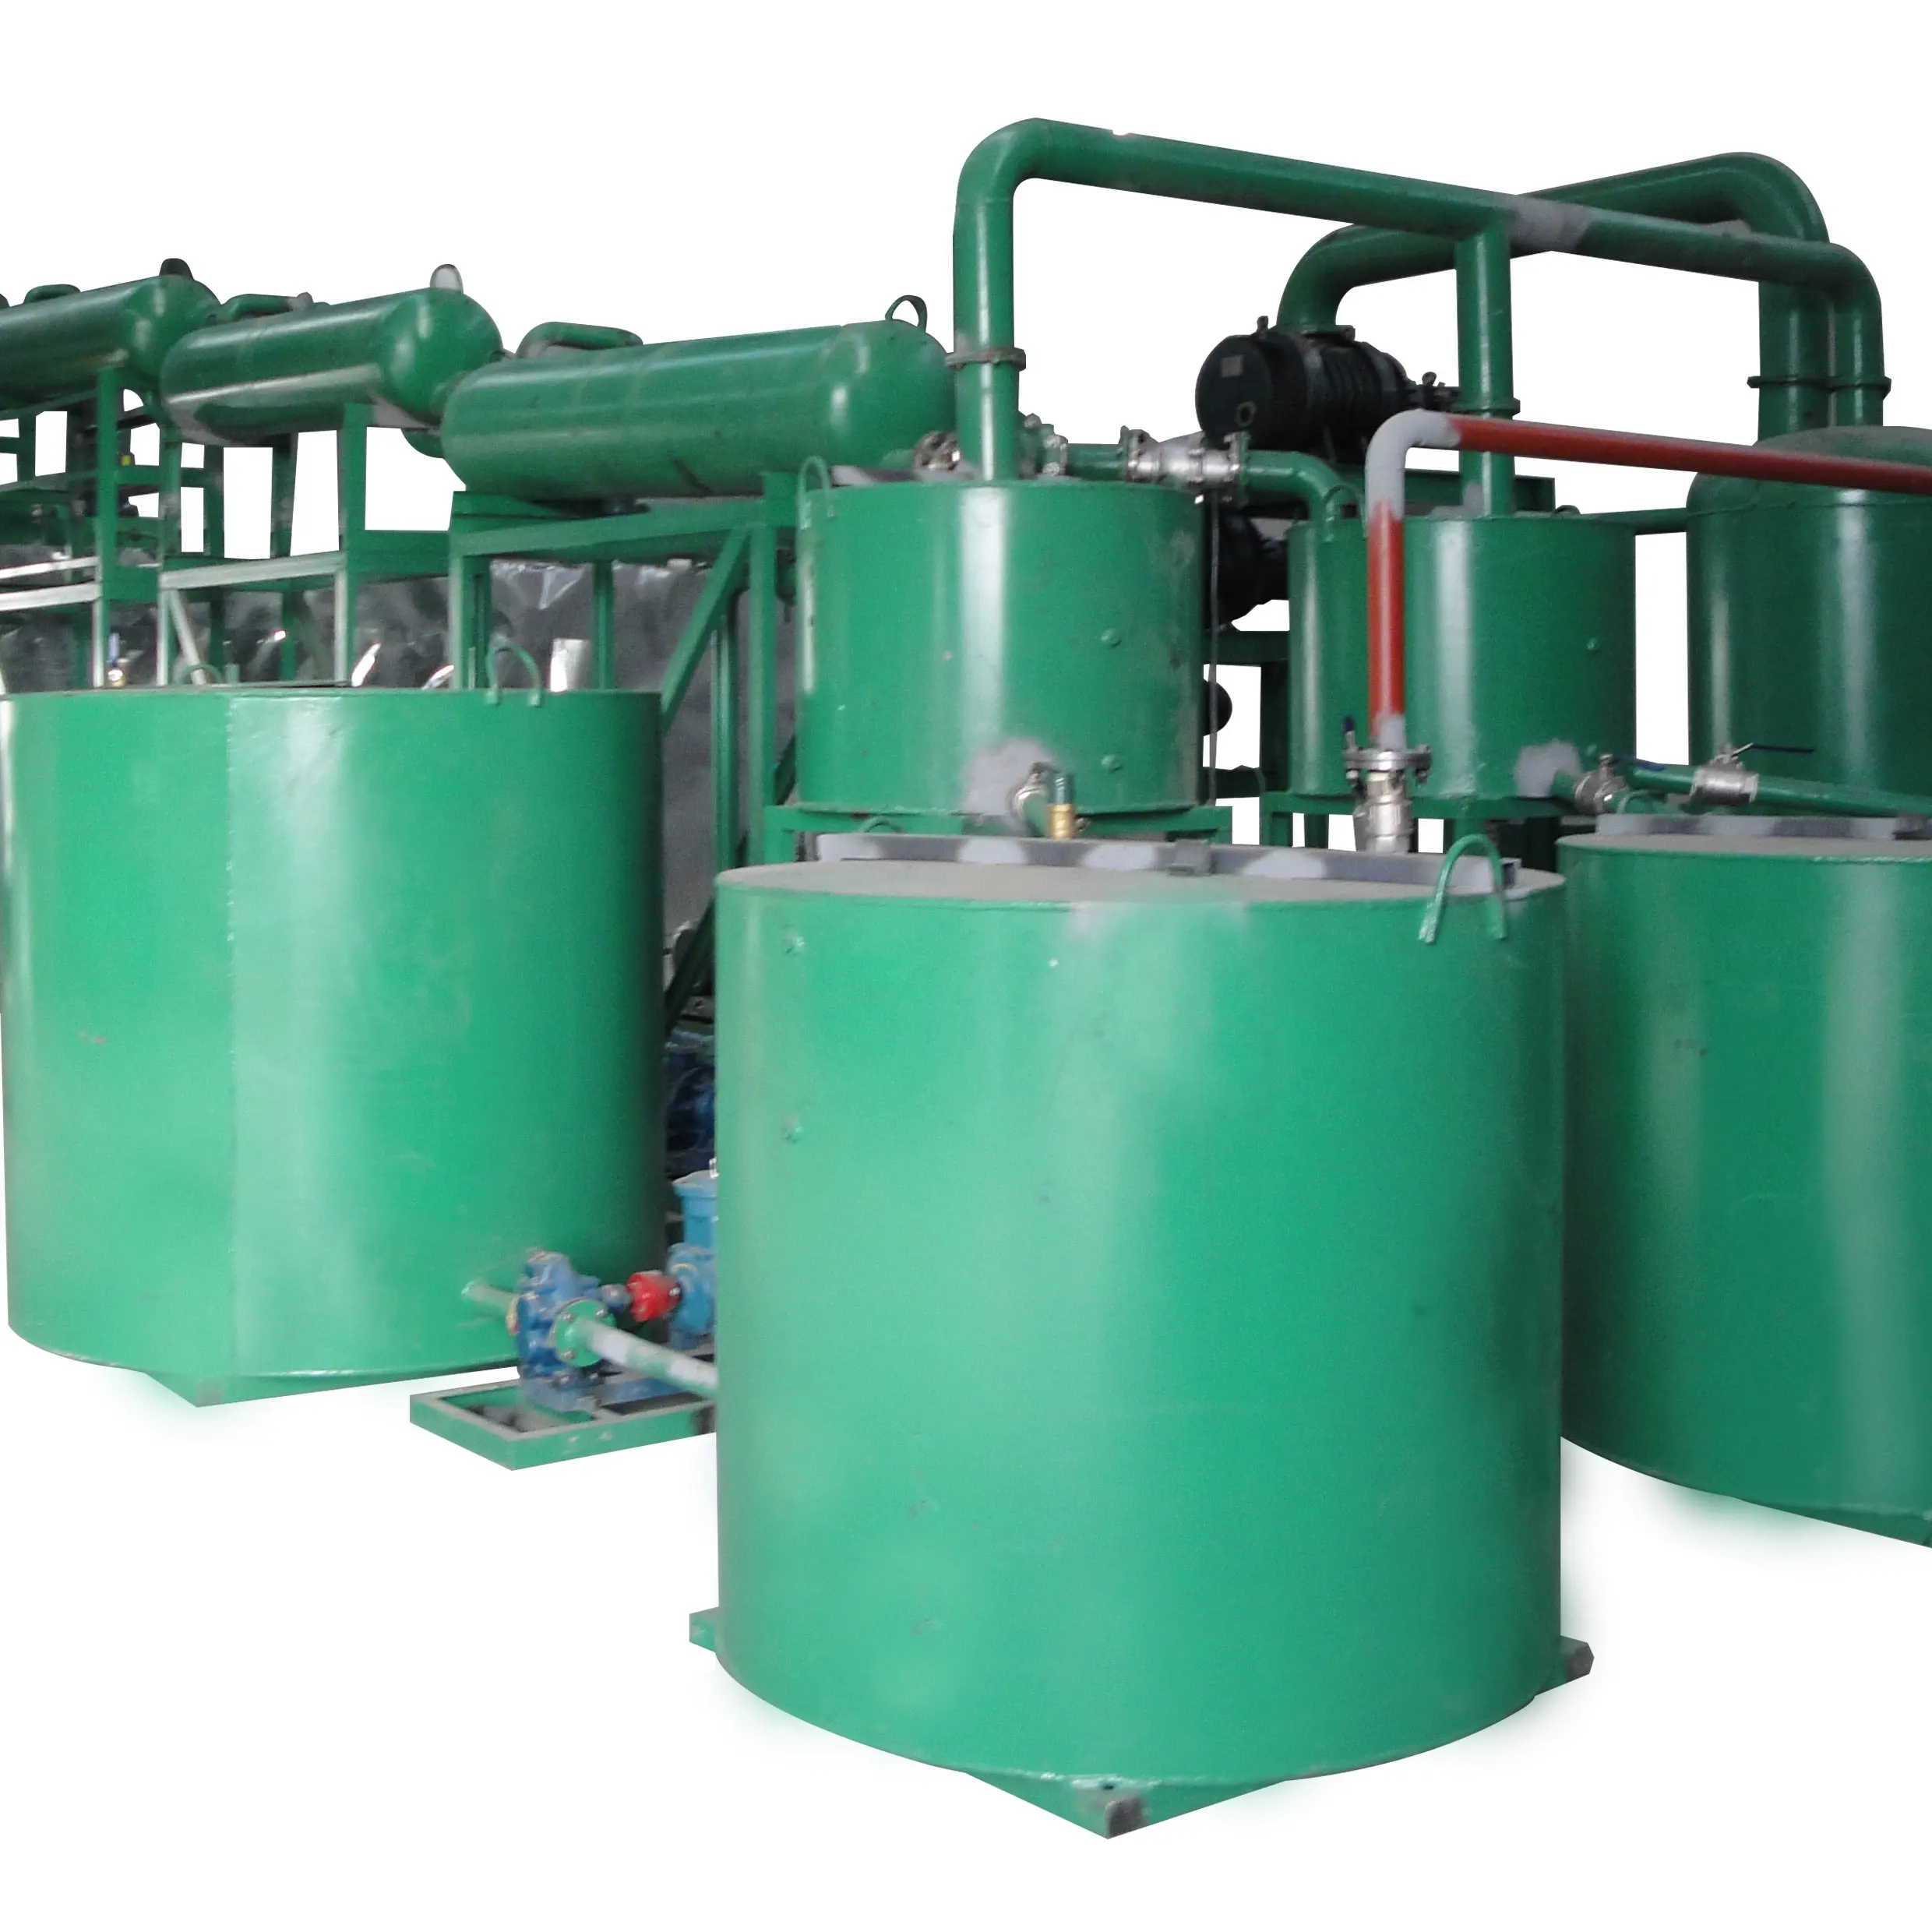 ZSC-5 used engine oil reprocessing plant chemical method to get base oil from waste engine oil